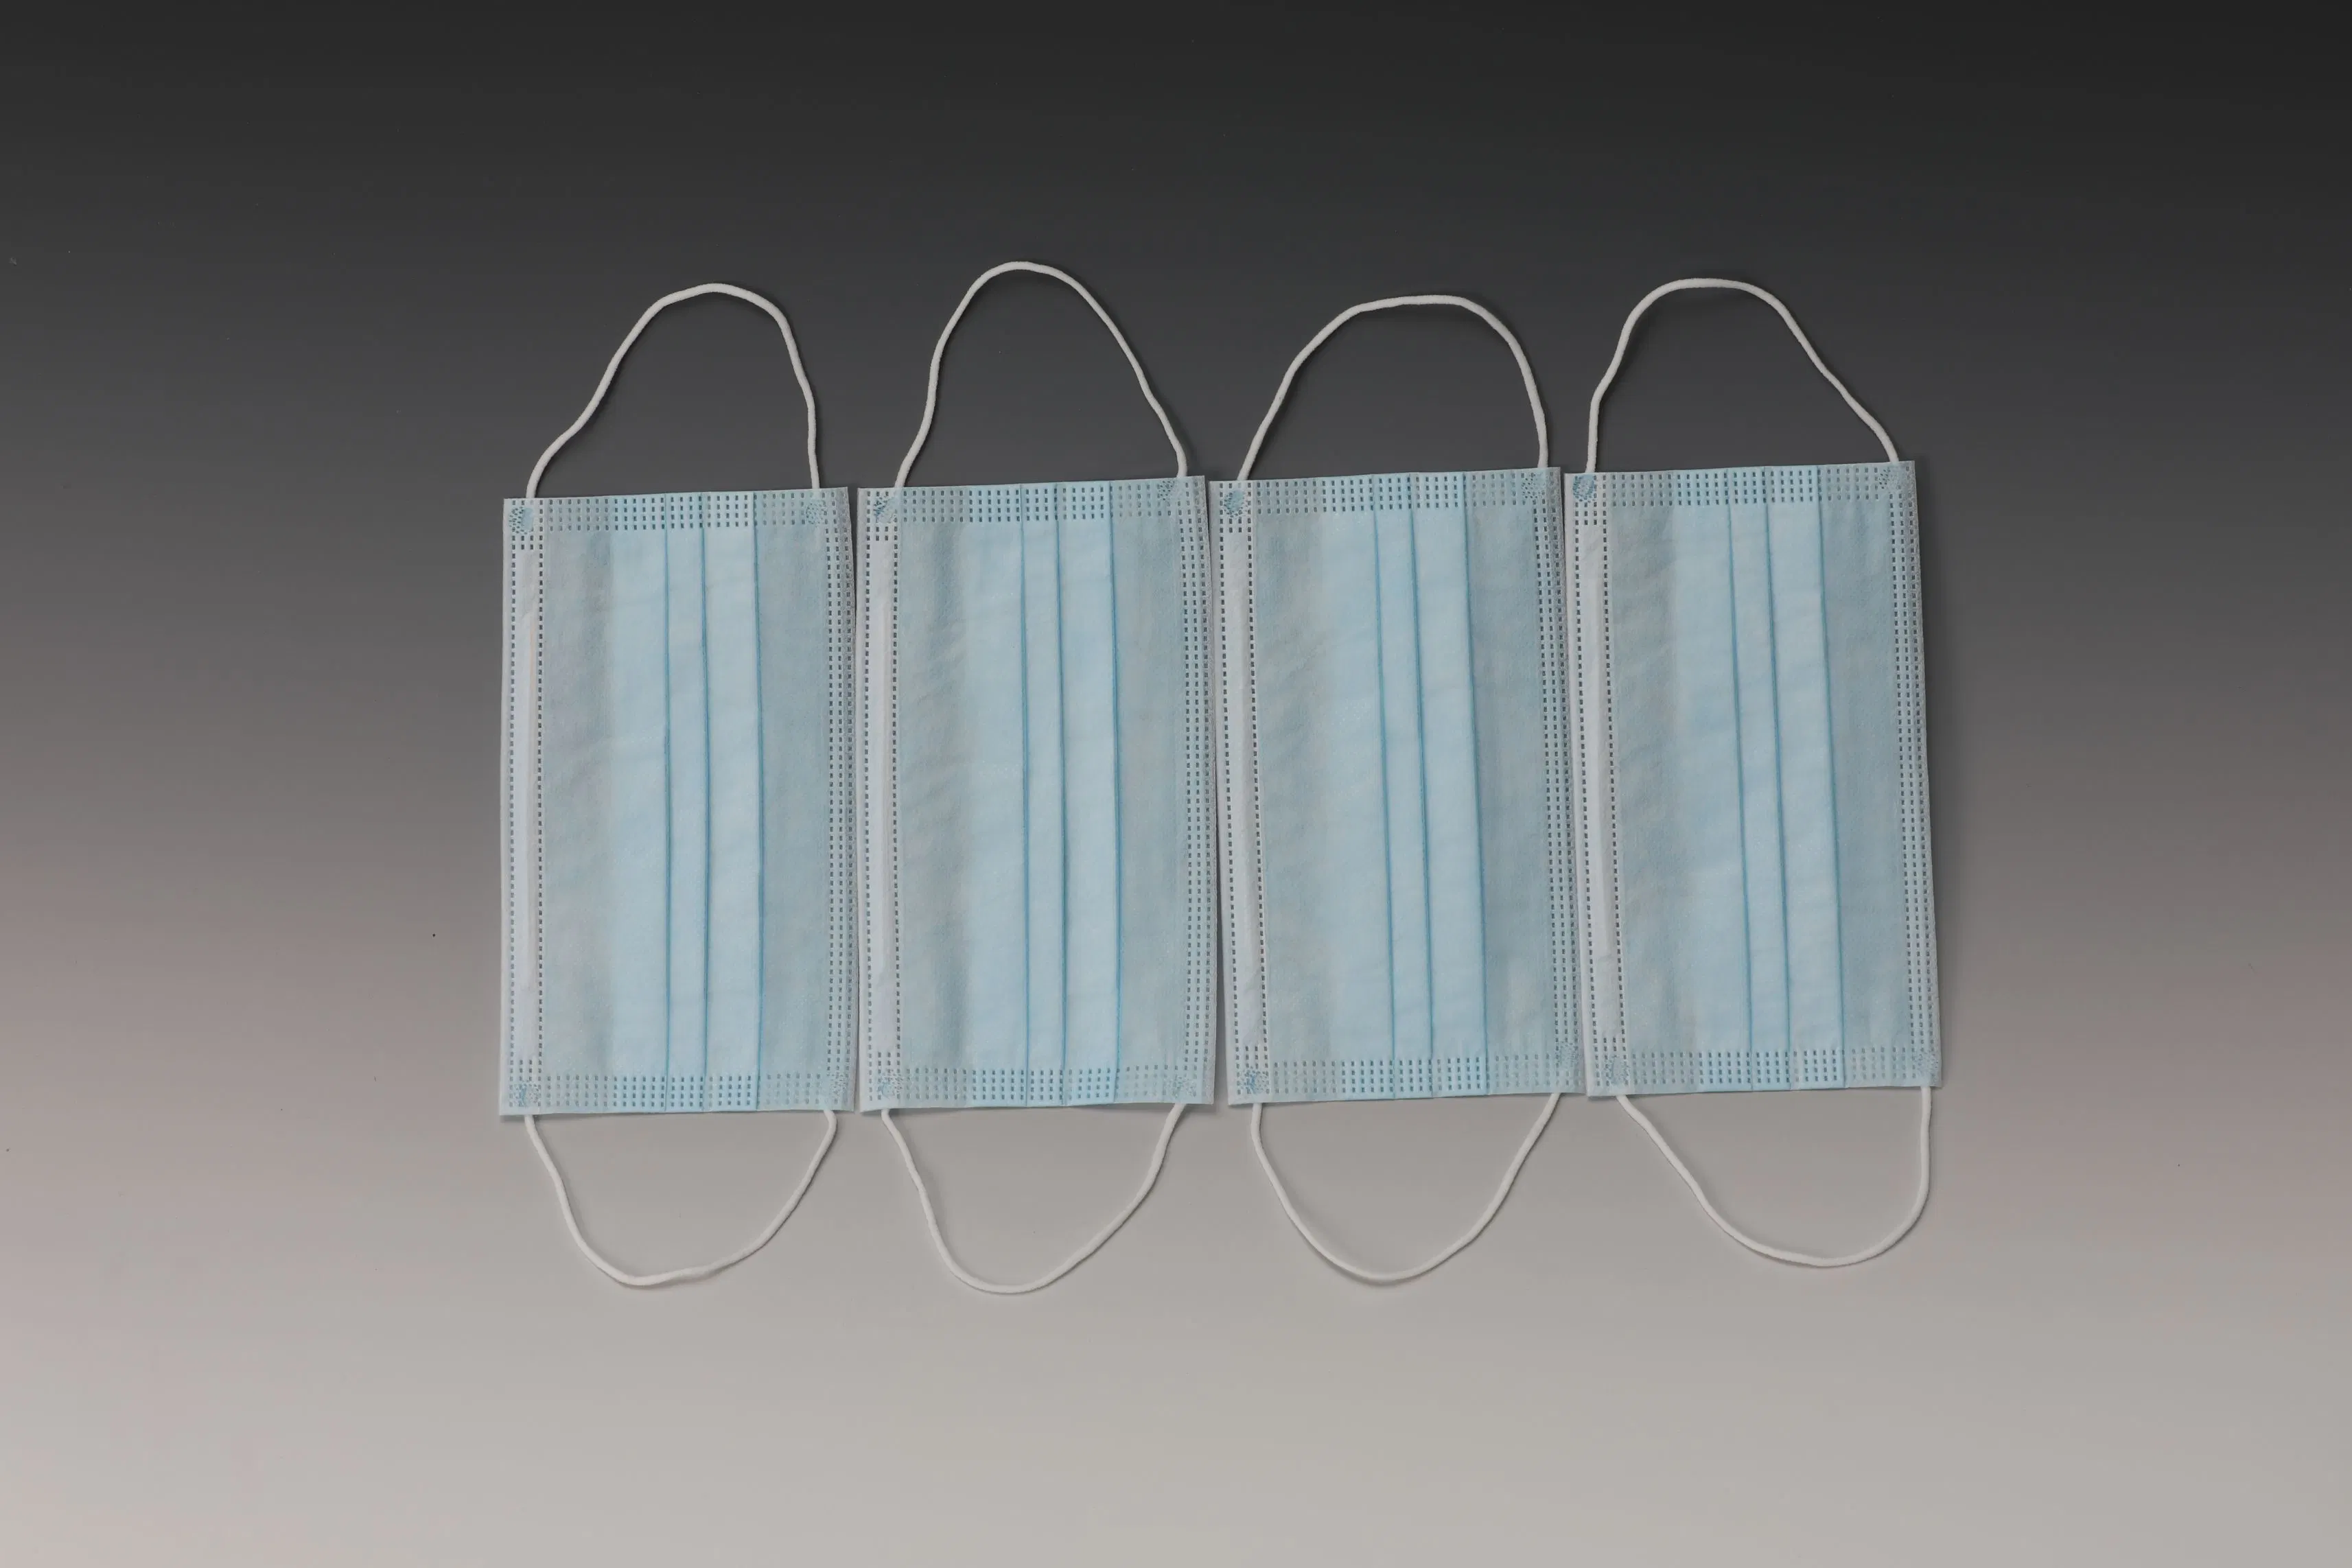 Single-Use Type II R 3ply Non-Woven Face Masks for Protection